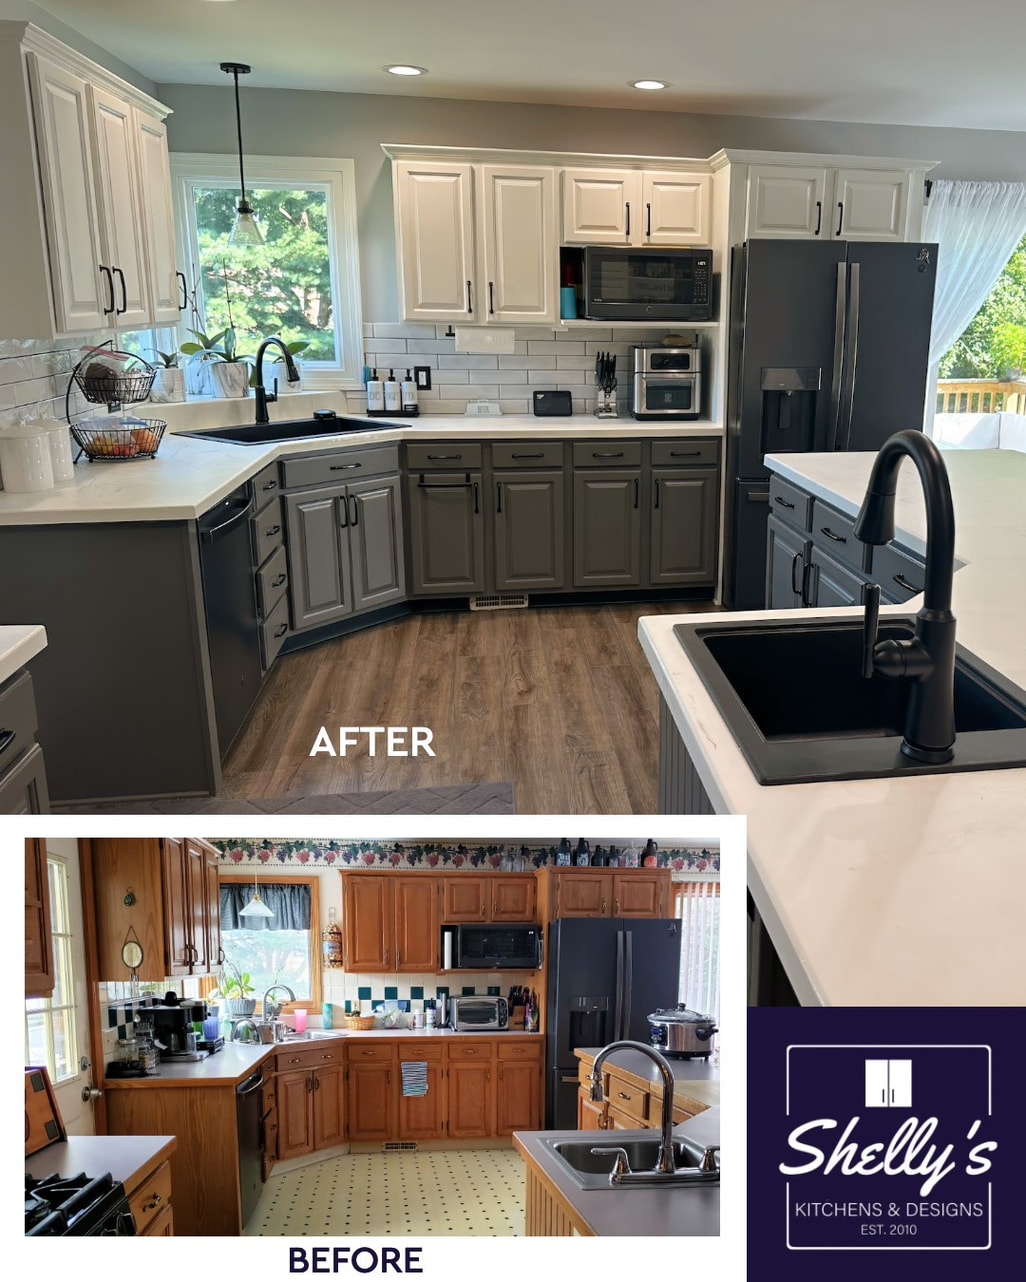 before and after kitchen cabinet painting, before and after kitchen cabinet refinishing, shelly’s kitchens, kitchen cabinet painting, kitchen cabinet refinishing, cabinet painters near me, cabinet refinishers near me, 